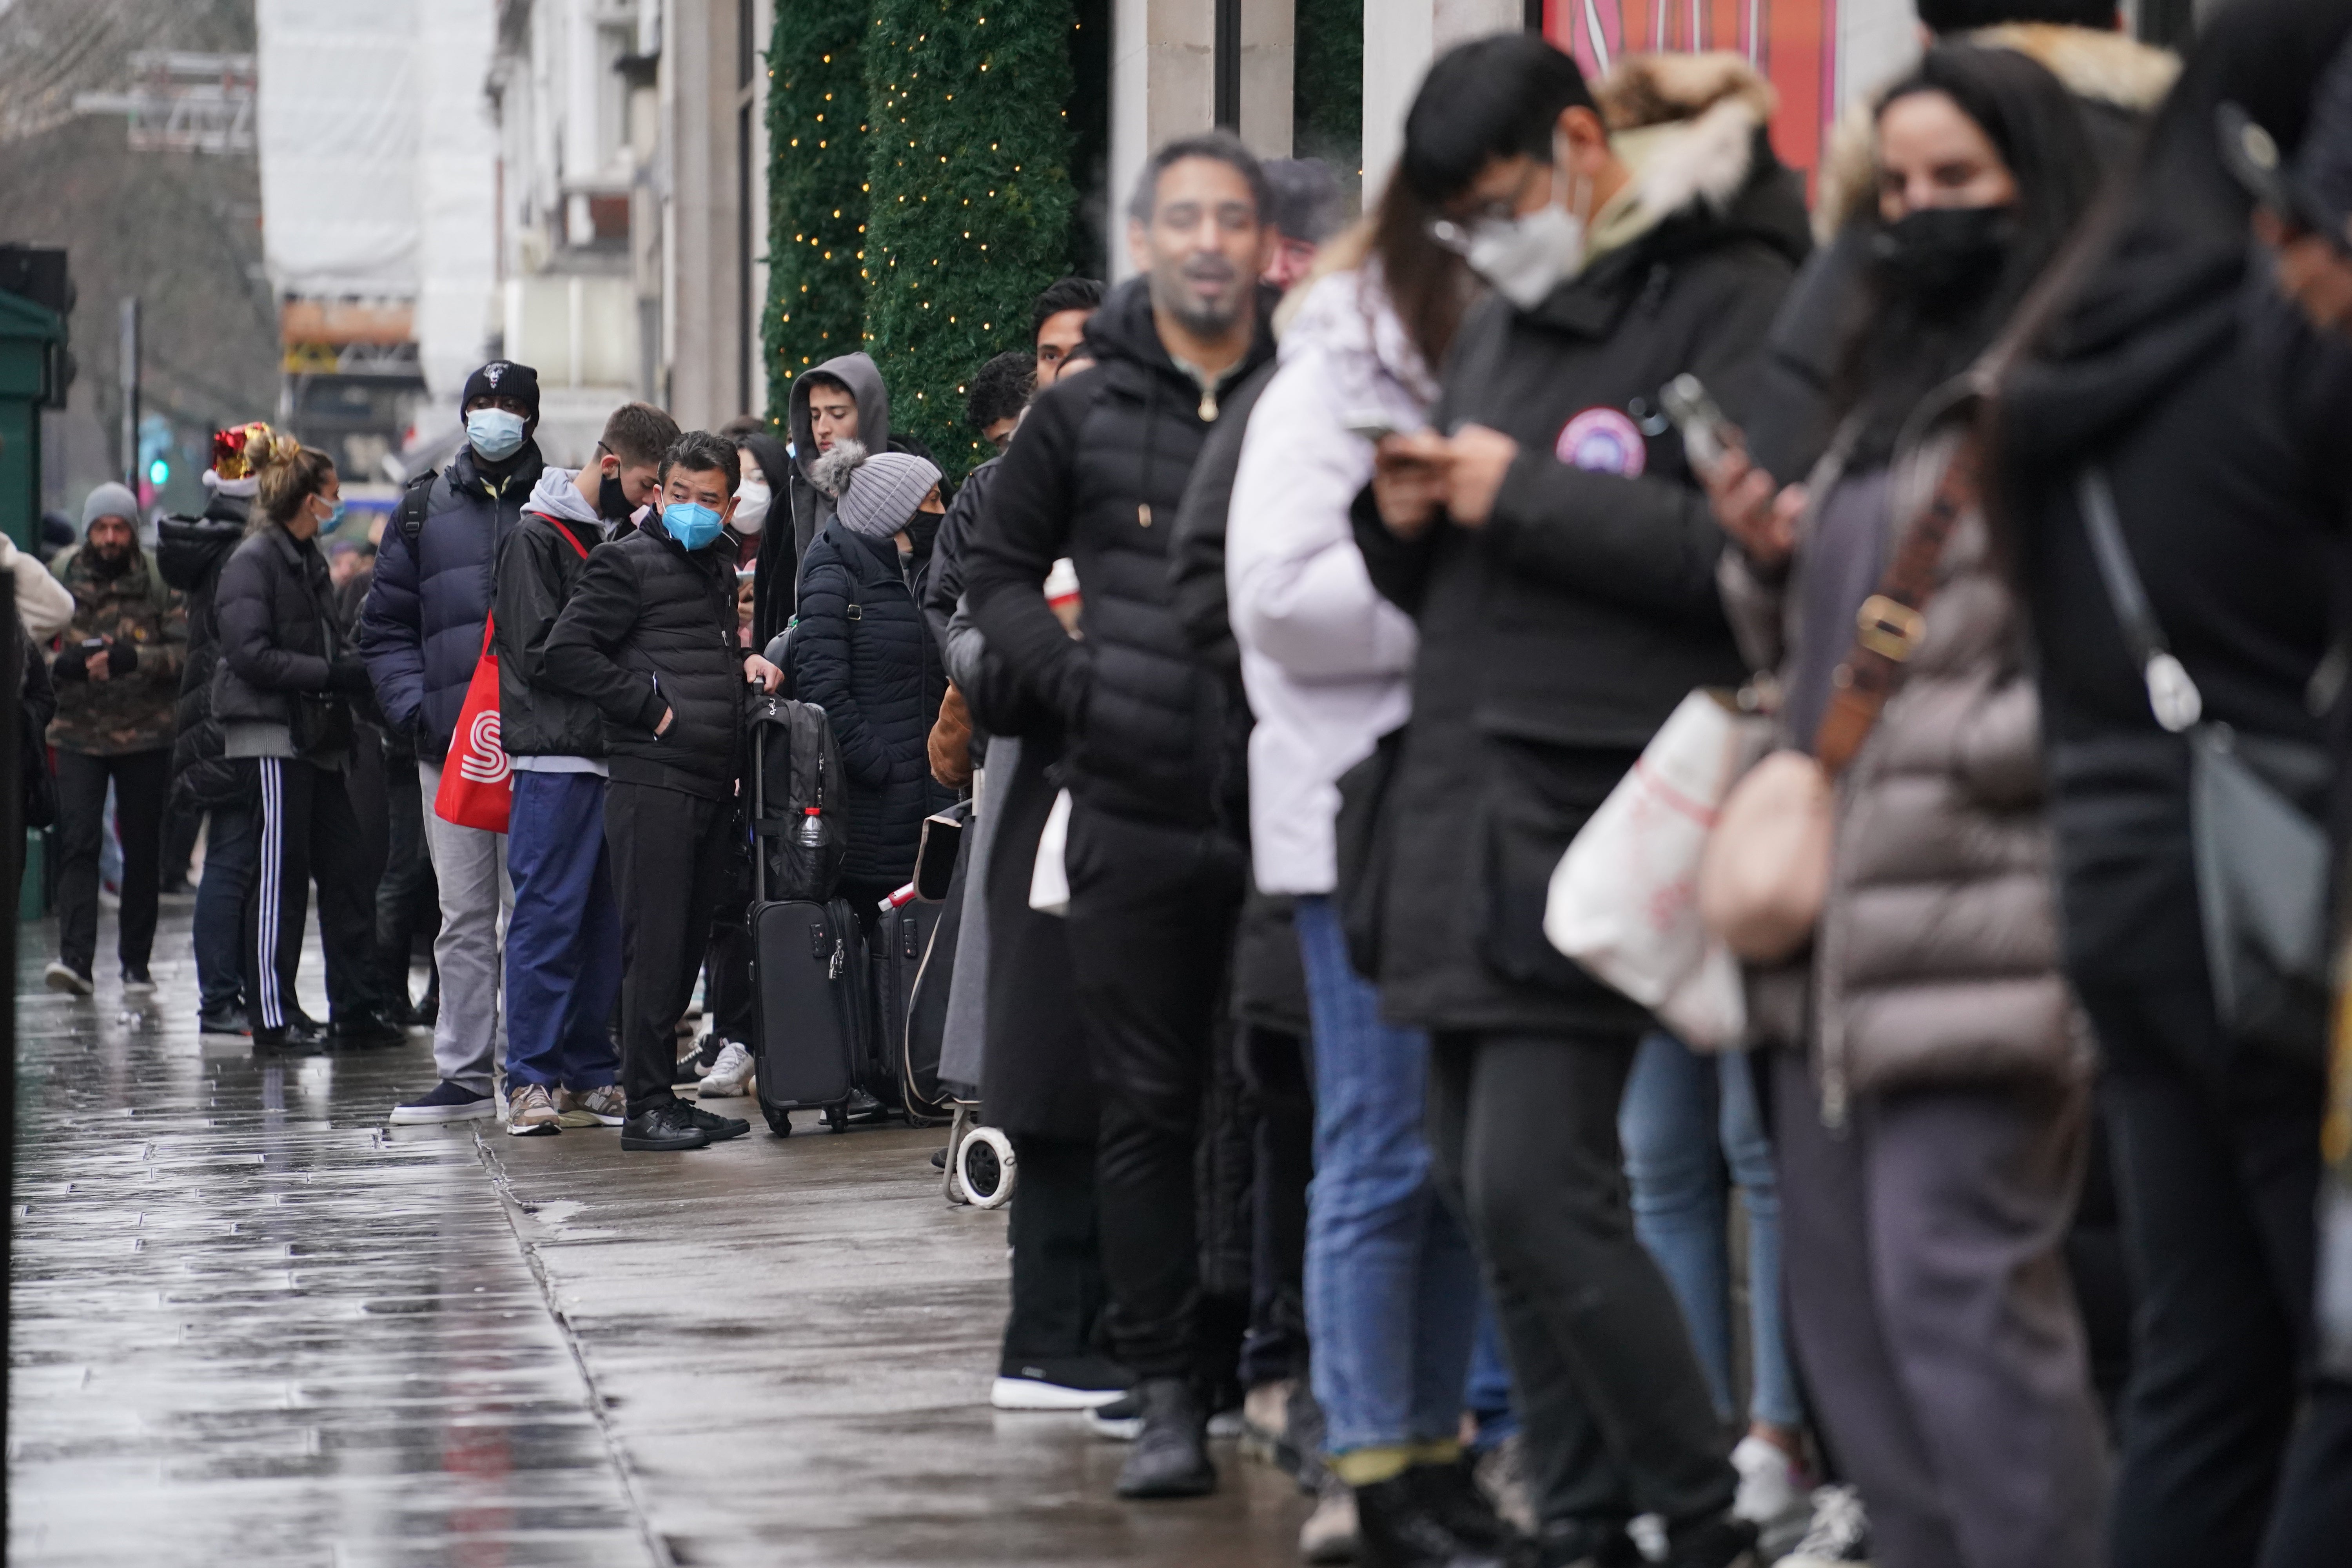 Shoppers stand in line for the doors to open for the start of the Boxing Day sales at Selfridges department store on Oxford Street in London (Jonathan Brady/PA)